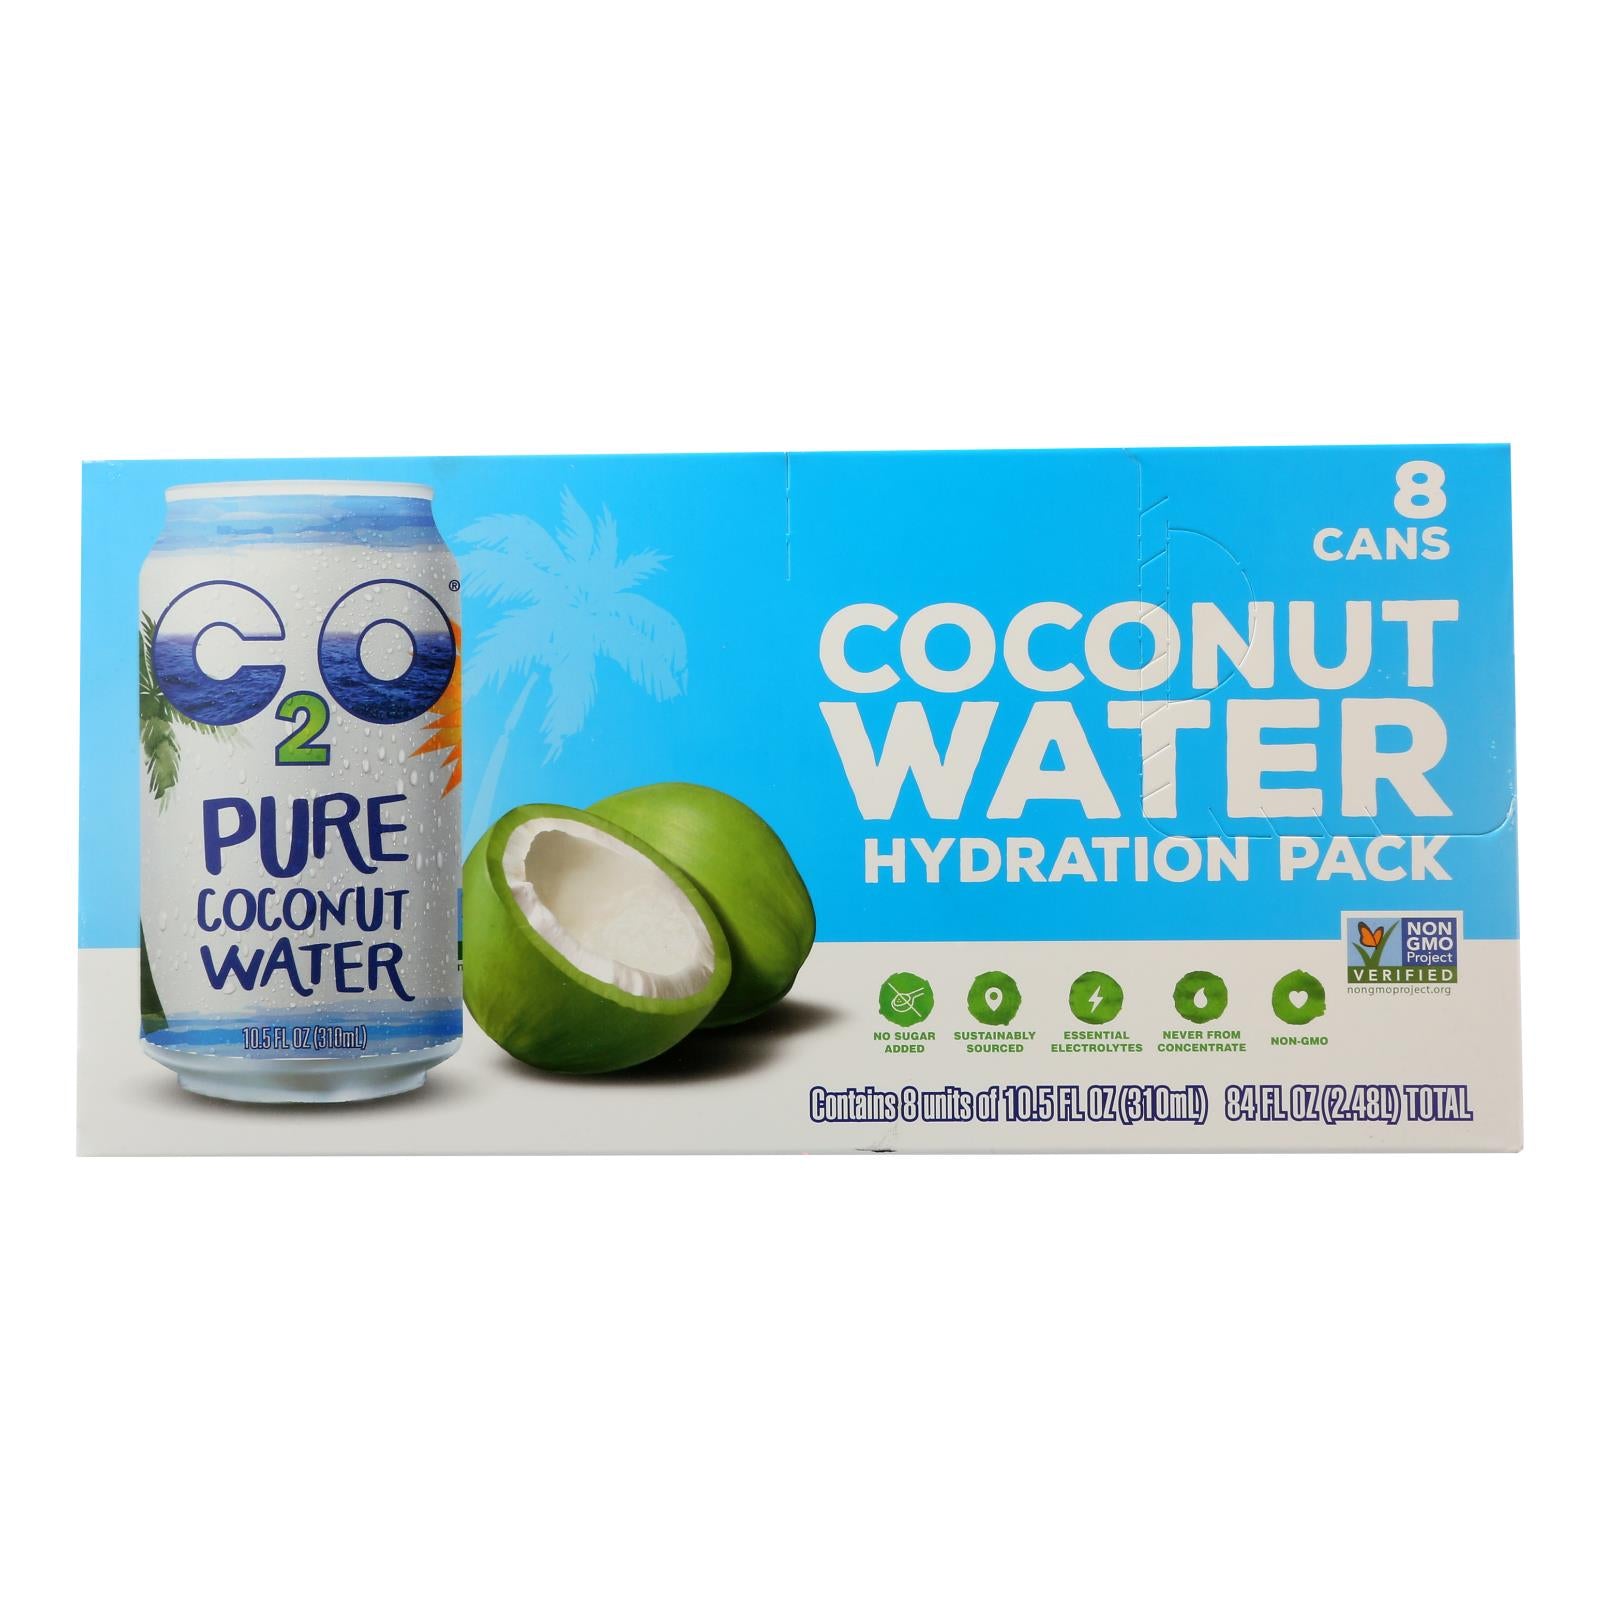 C2o Pure Coconut Water - Coconut Water Hydration Pack - Case of 3 - 8/10.5FZ